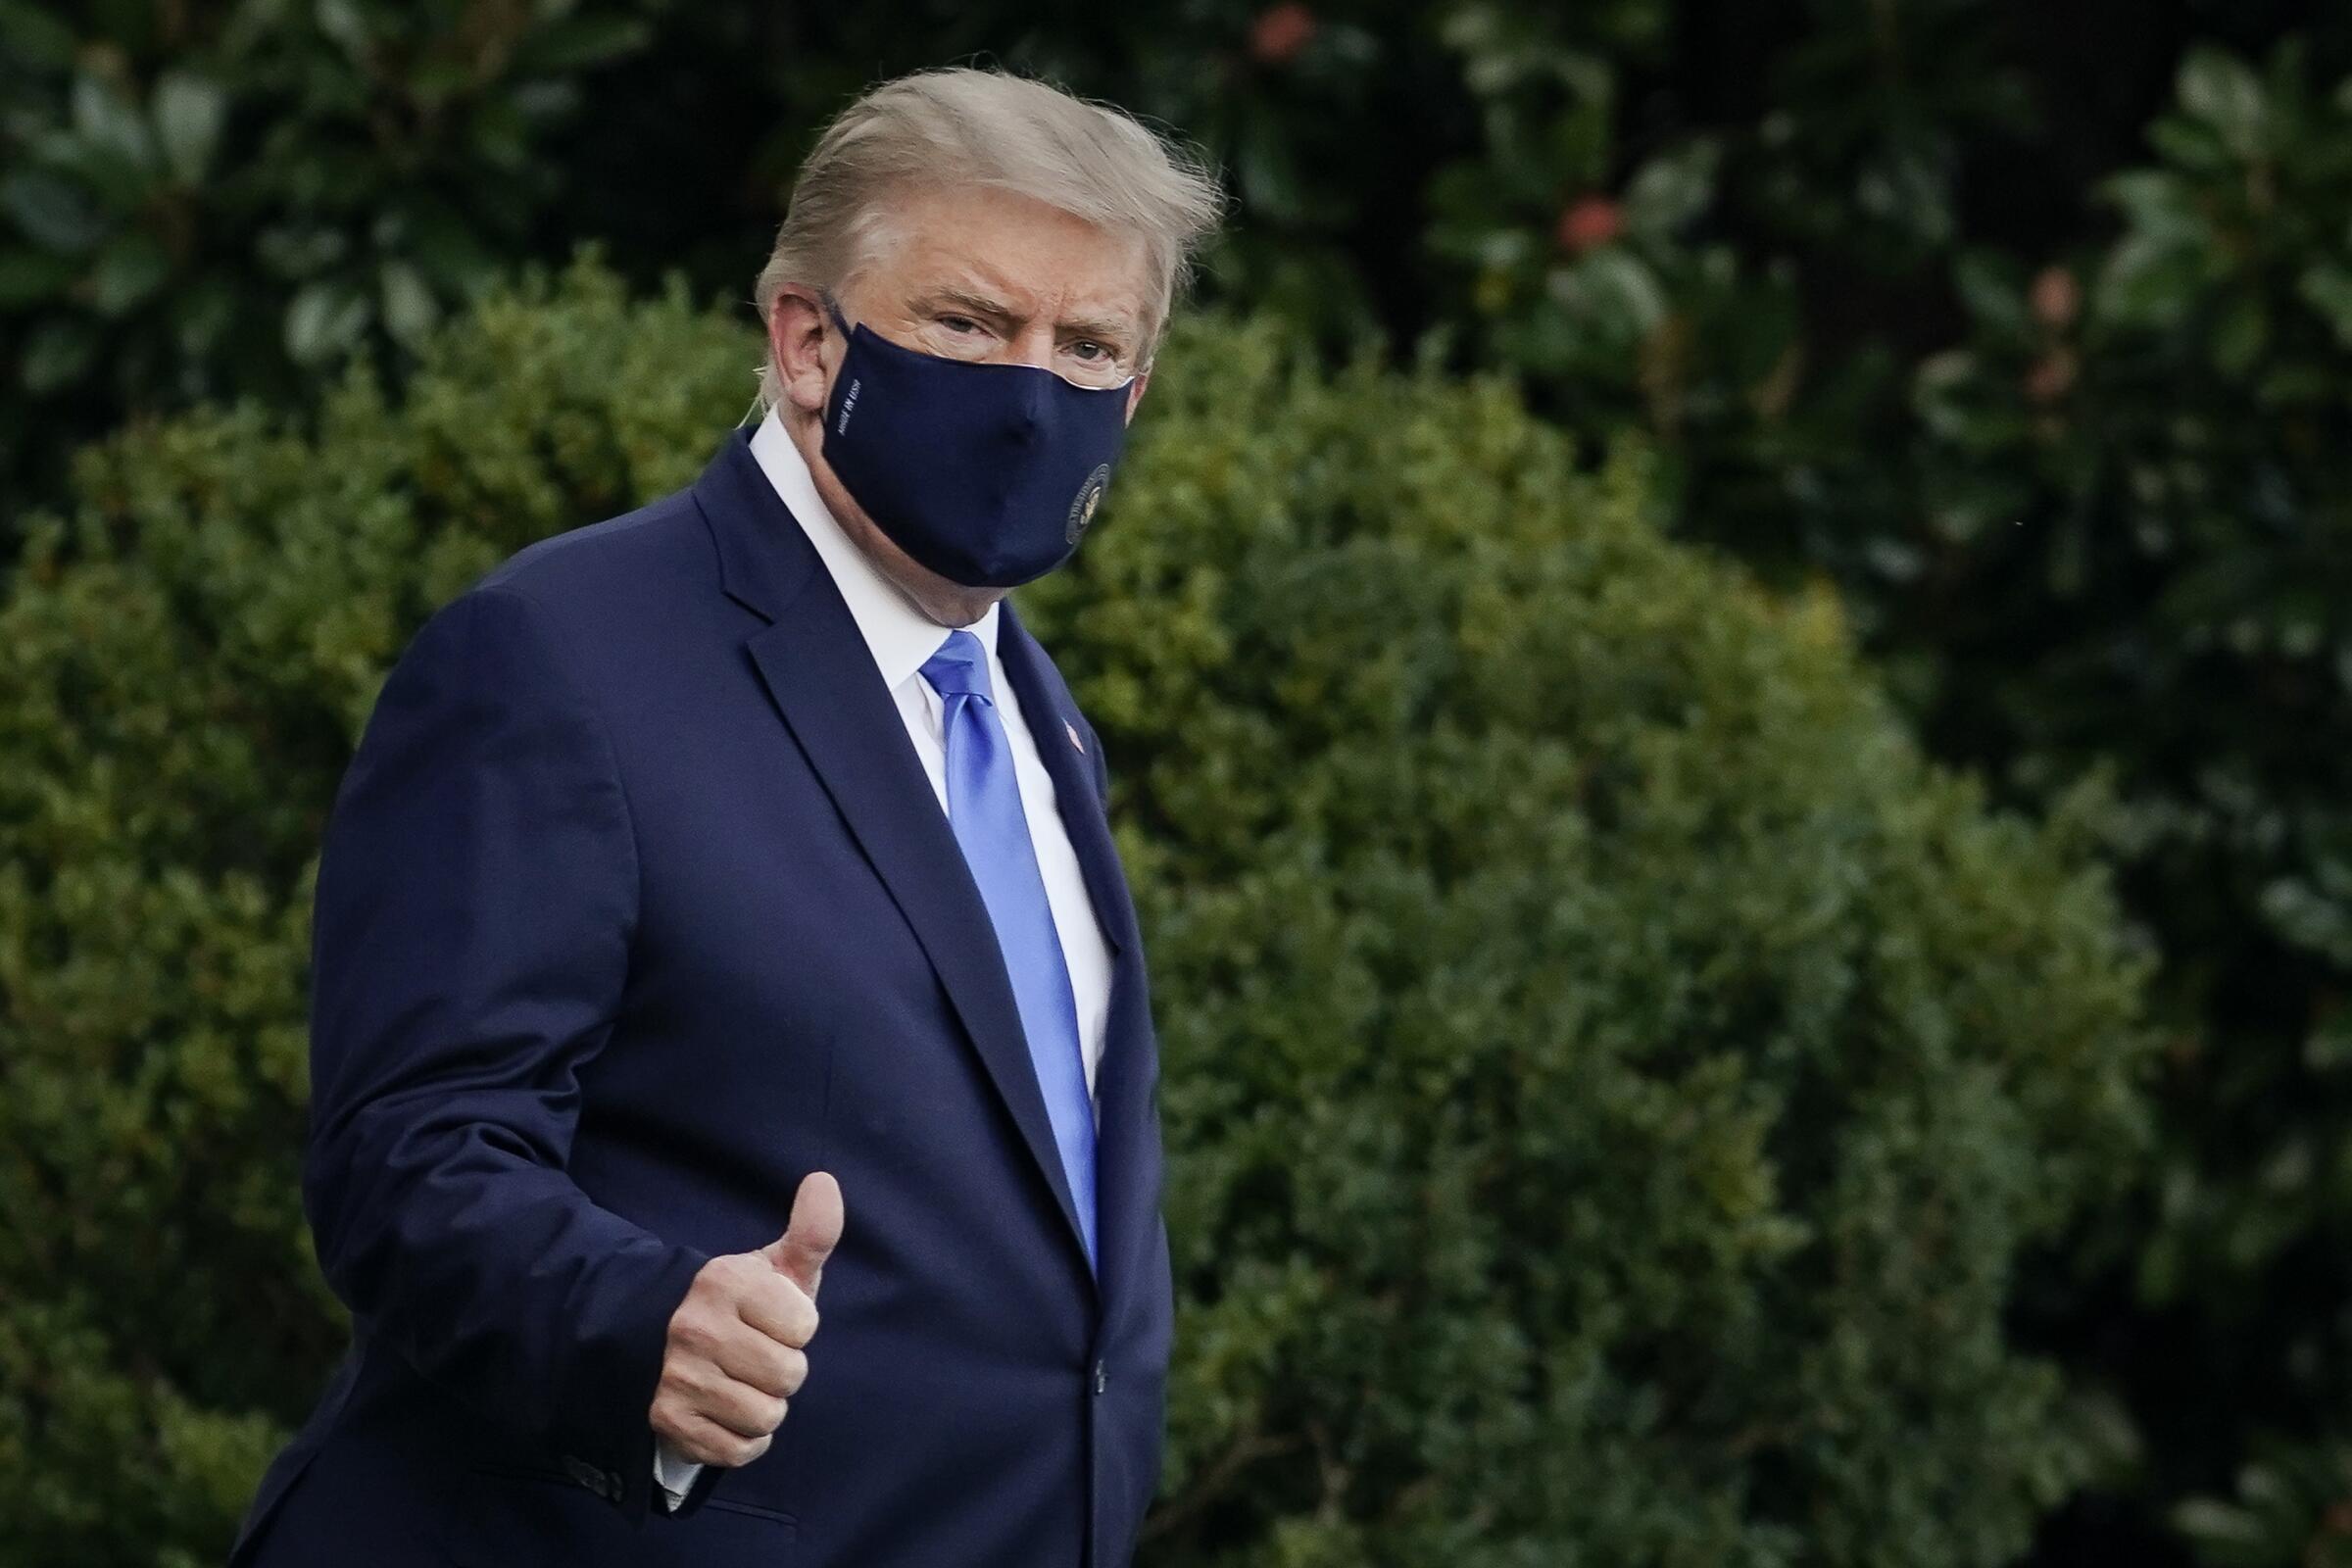 President Trump wearing a mask and flashing a thumbs-up